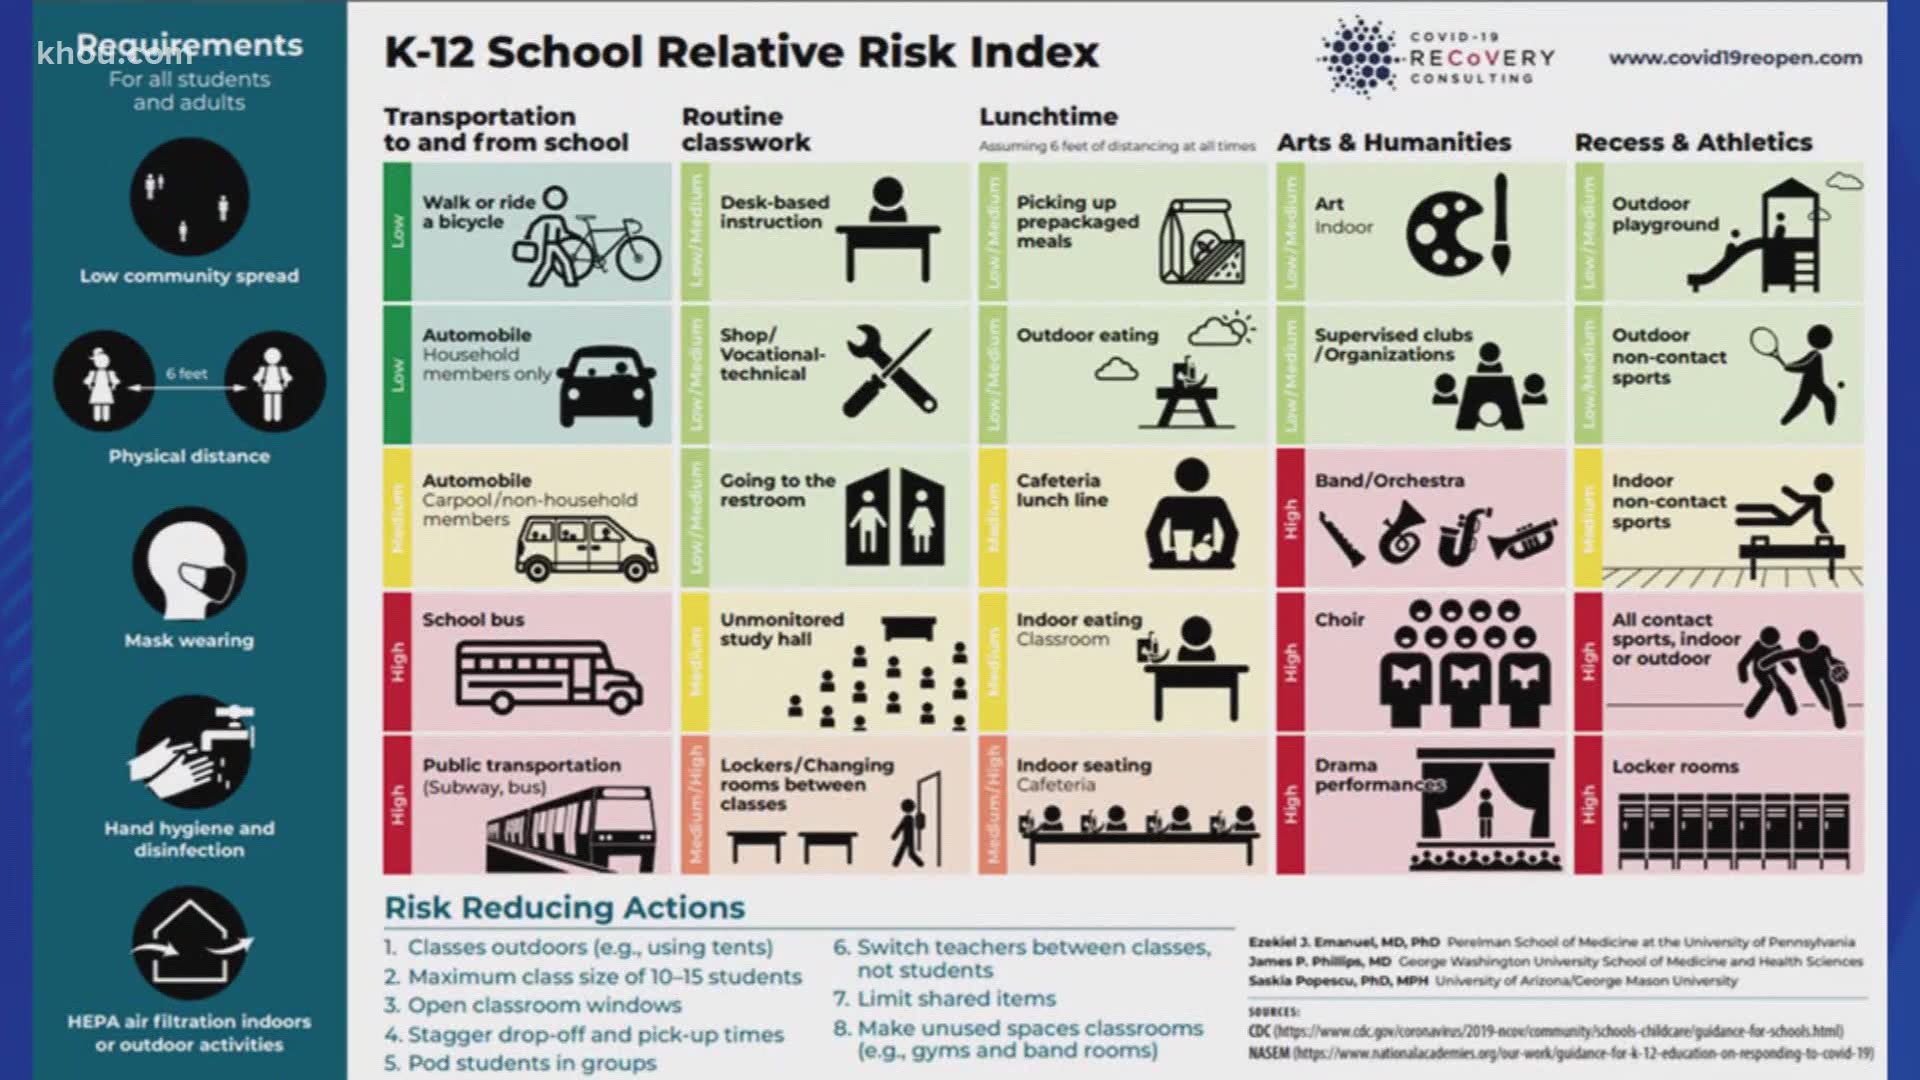 With kids heading back to school, there’s a lot to think about when it comes to risk. But there’s a simple tool that could help parents lower those risks.